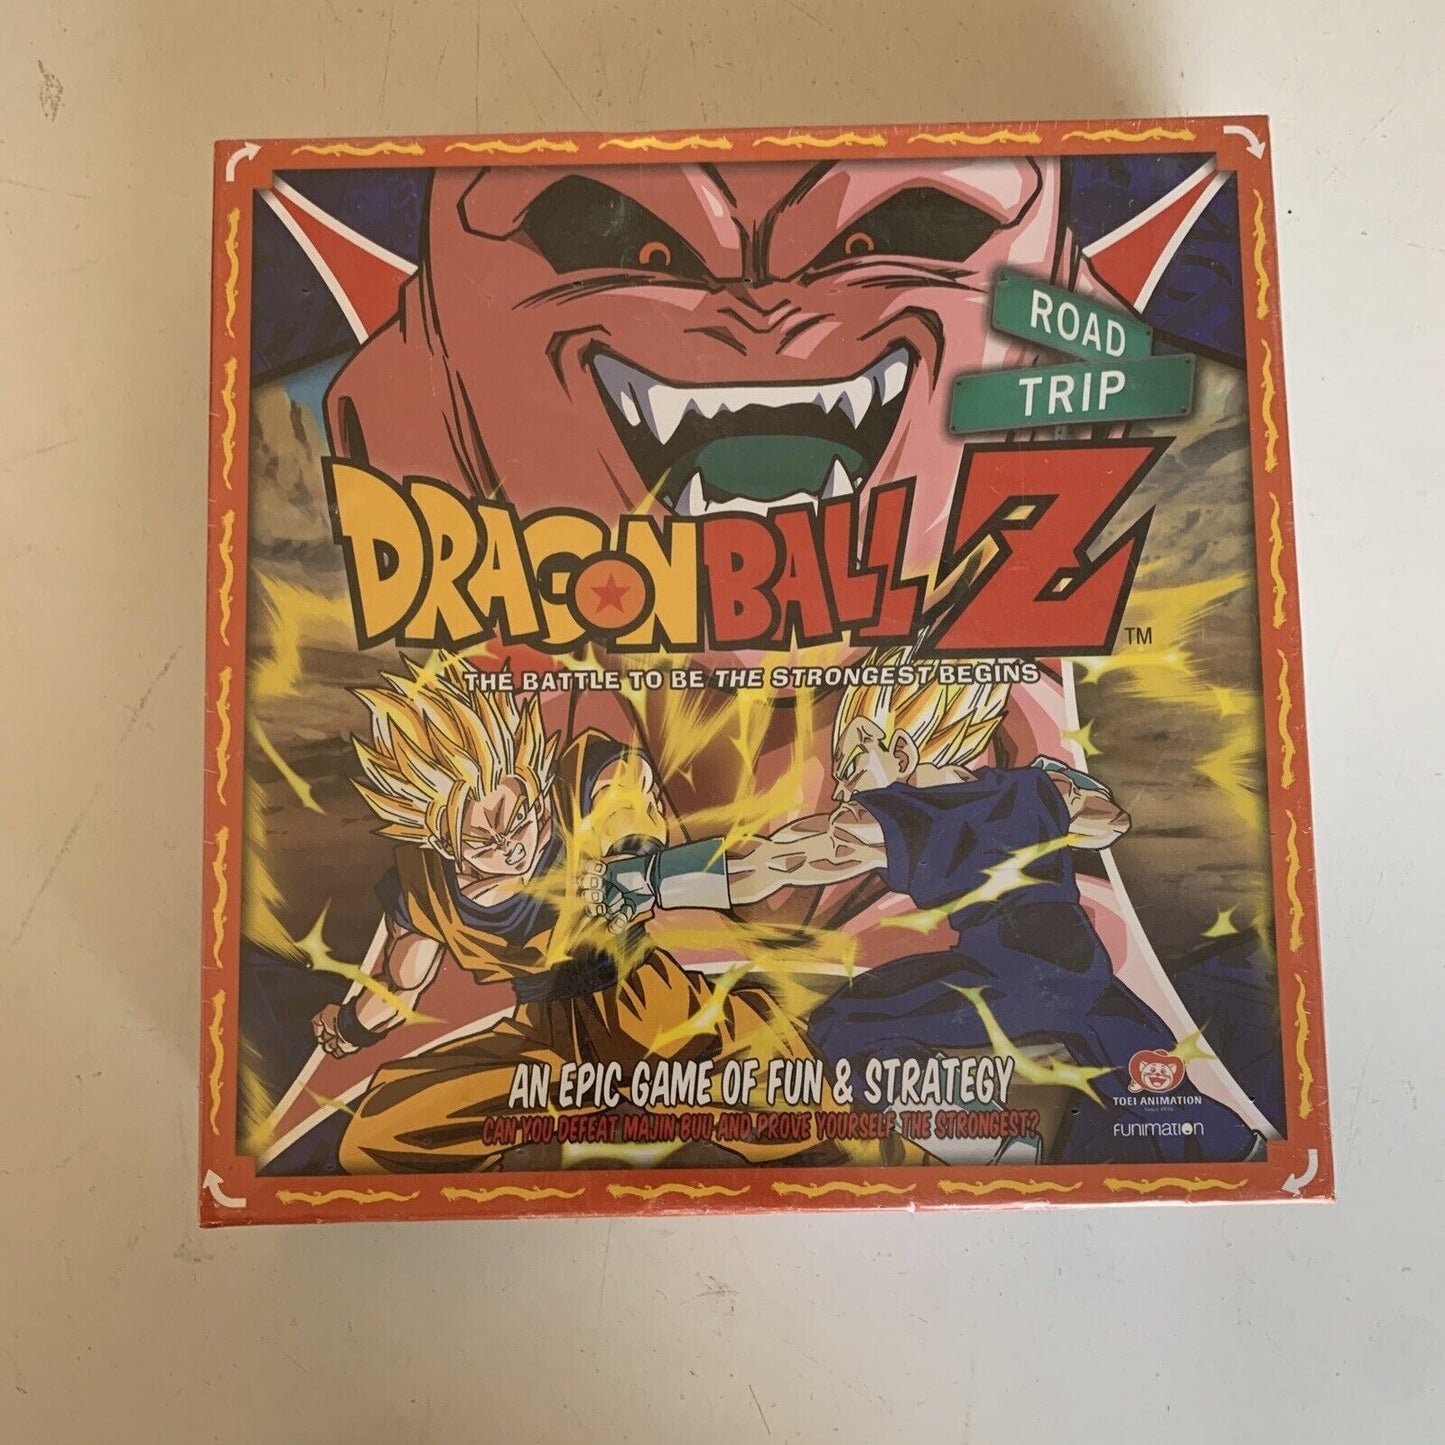 *New Sealed* Dragon Ball Z Road Trip Board Game - Battle of the Strongest